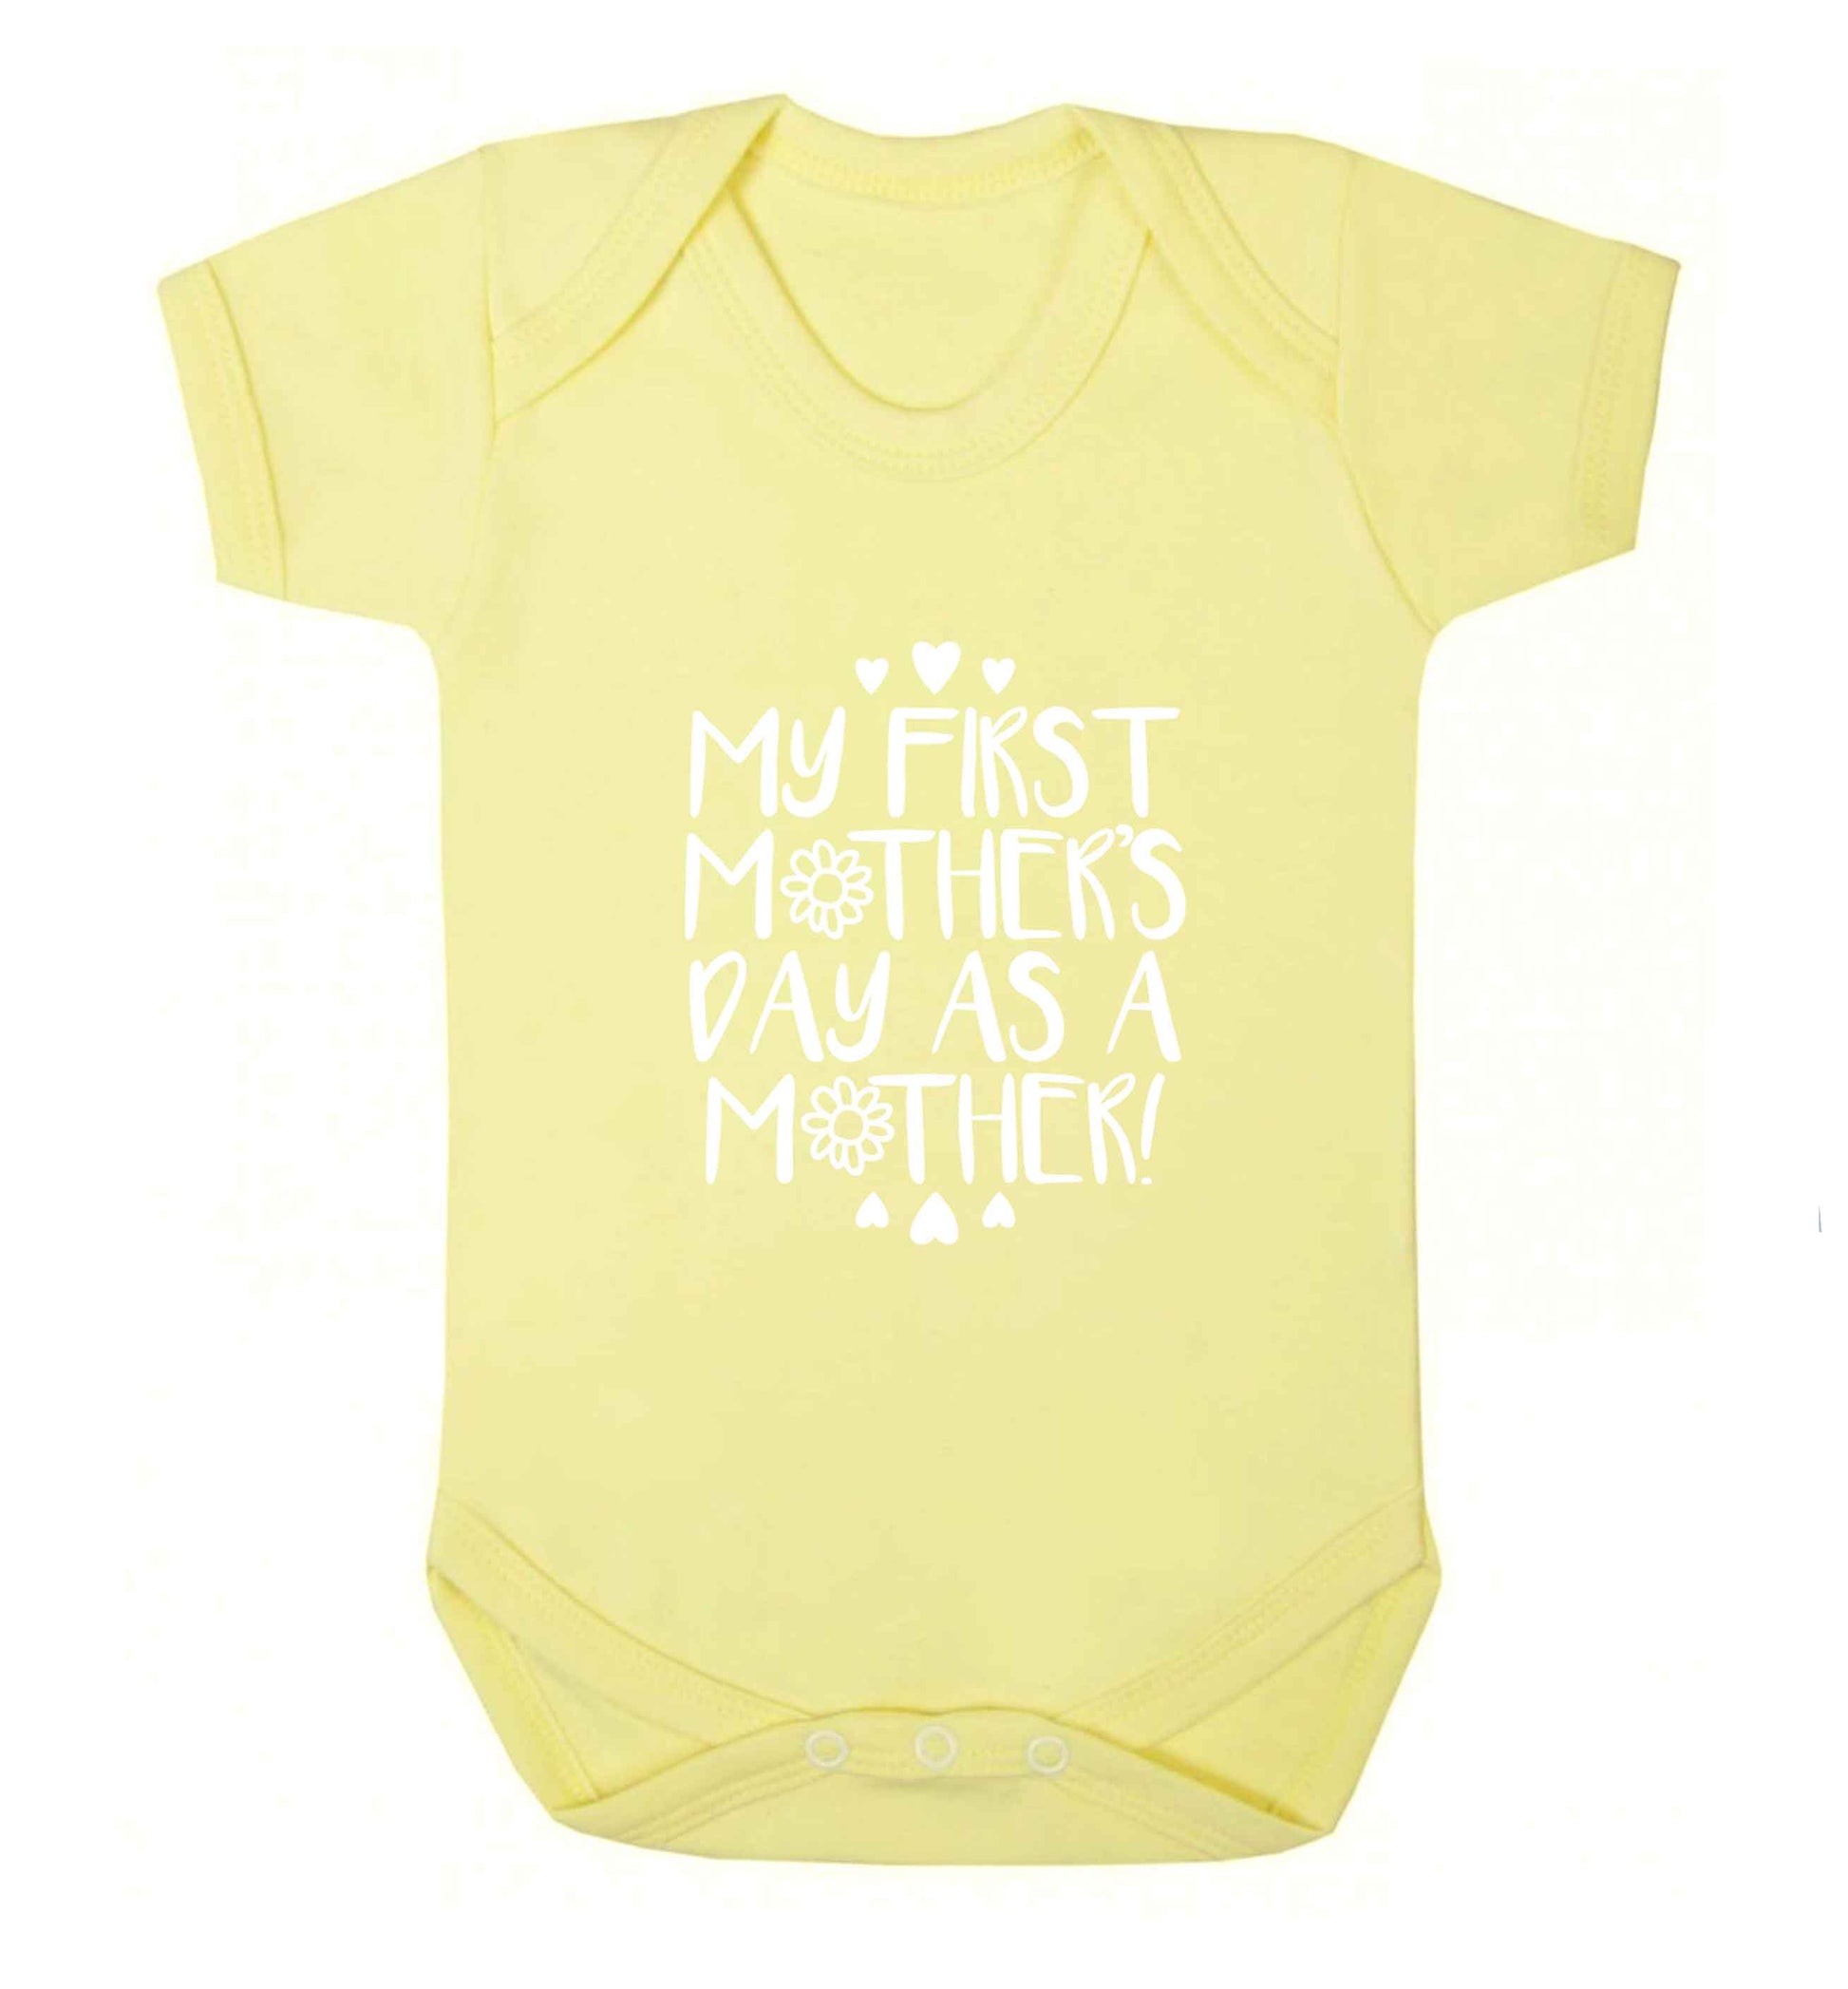 It's my first mother's day as a mother baby vest pale yellow 18-24 months